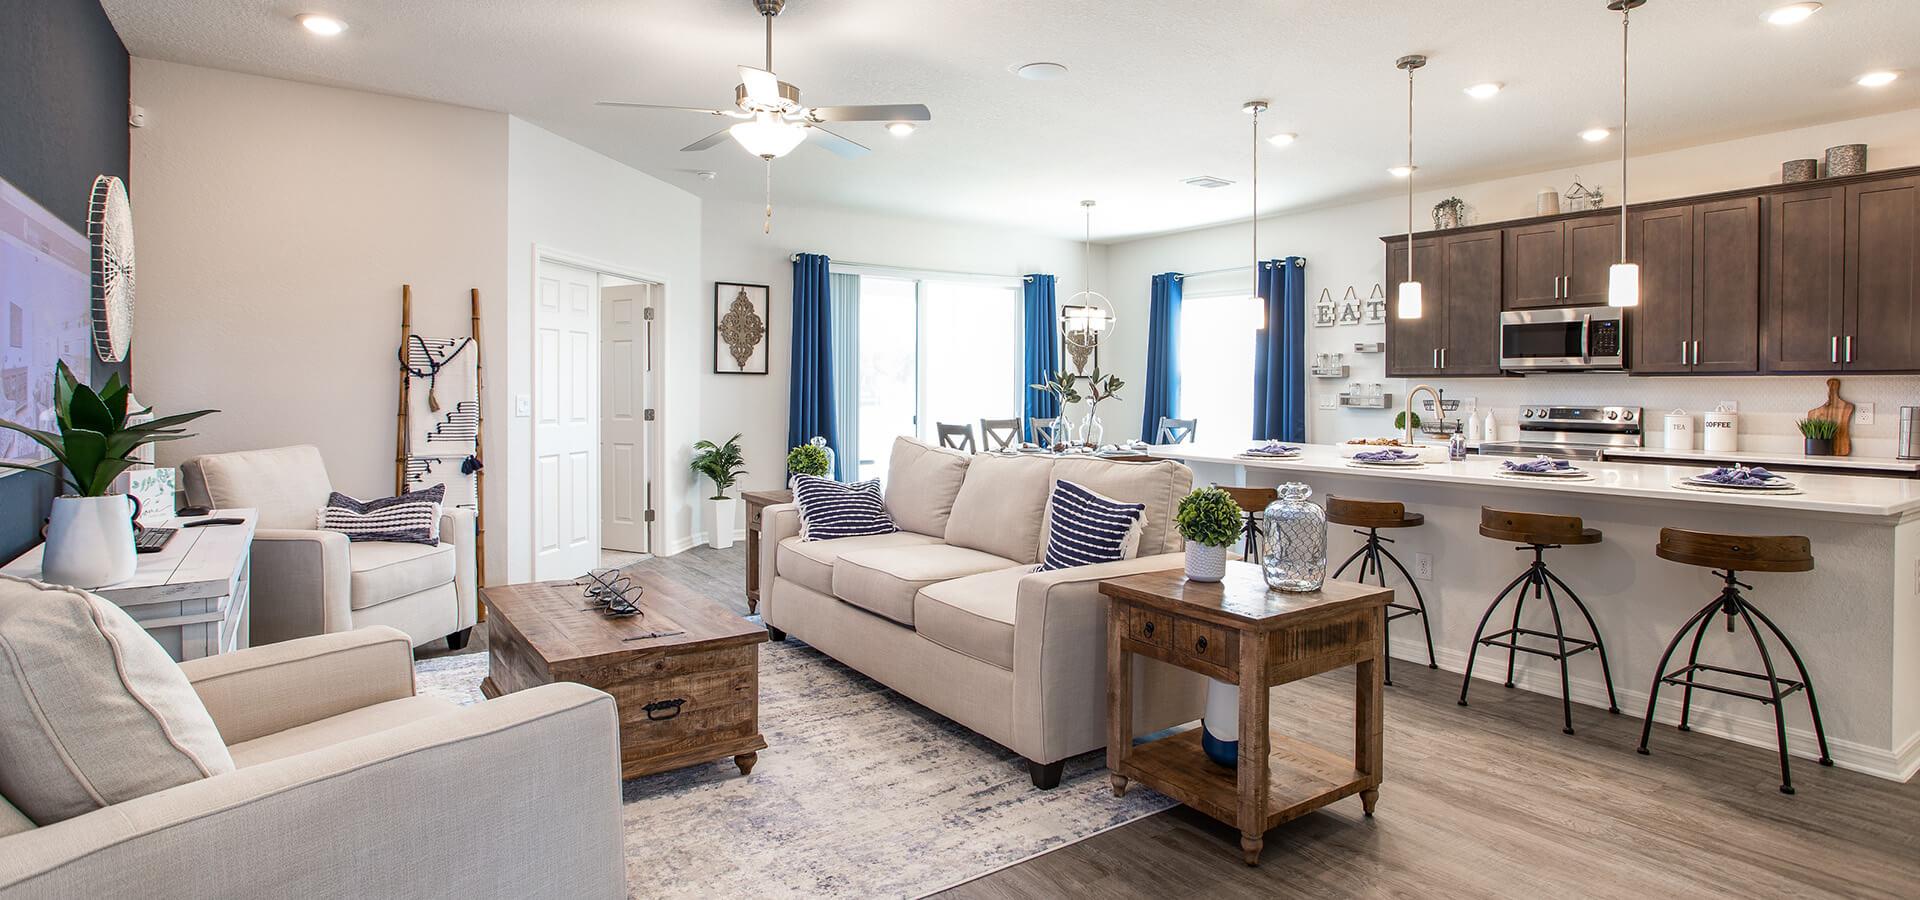 Gathering room in the Serendipity model home in Davenport, FL